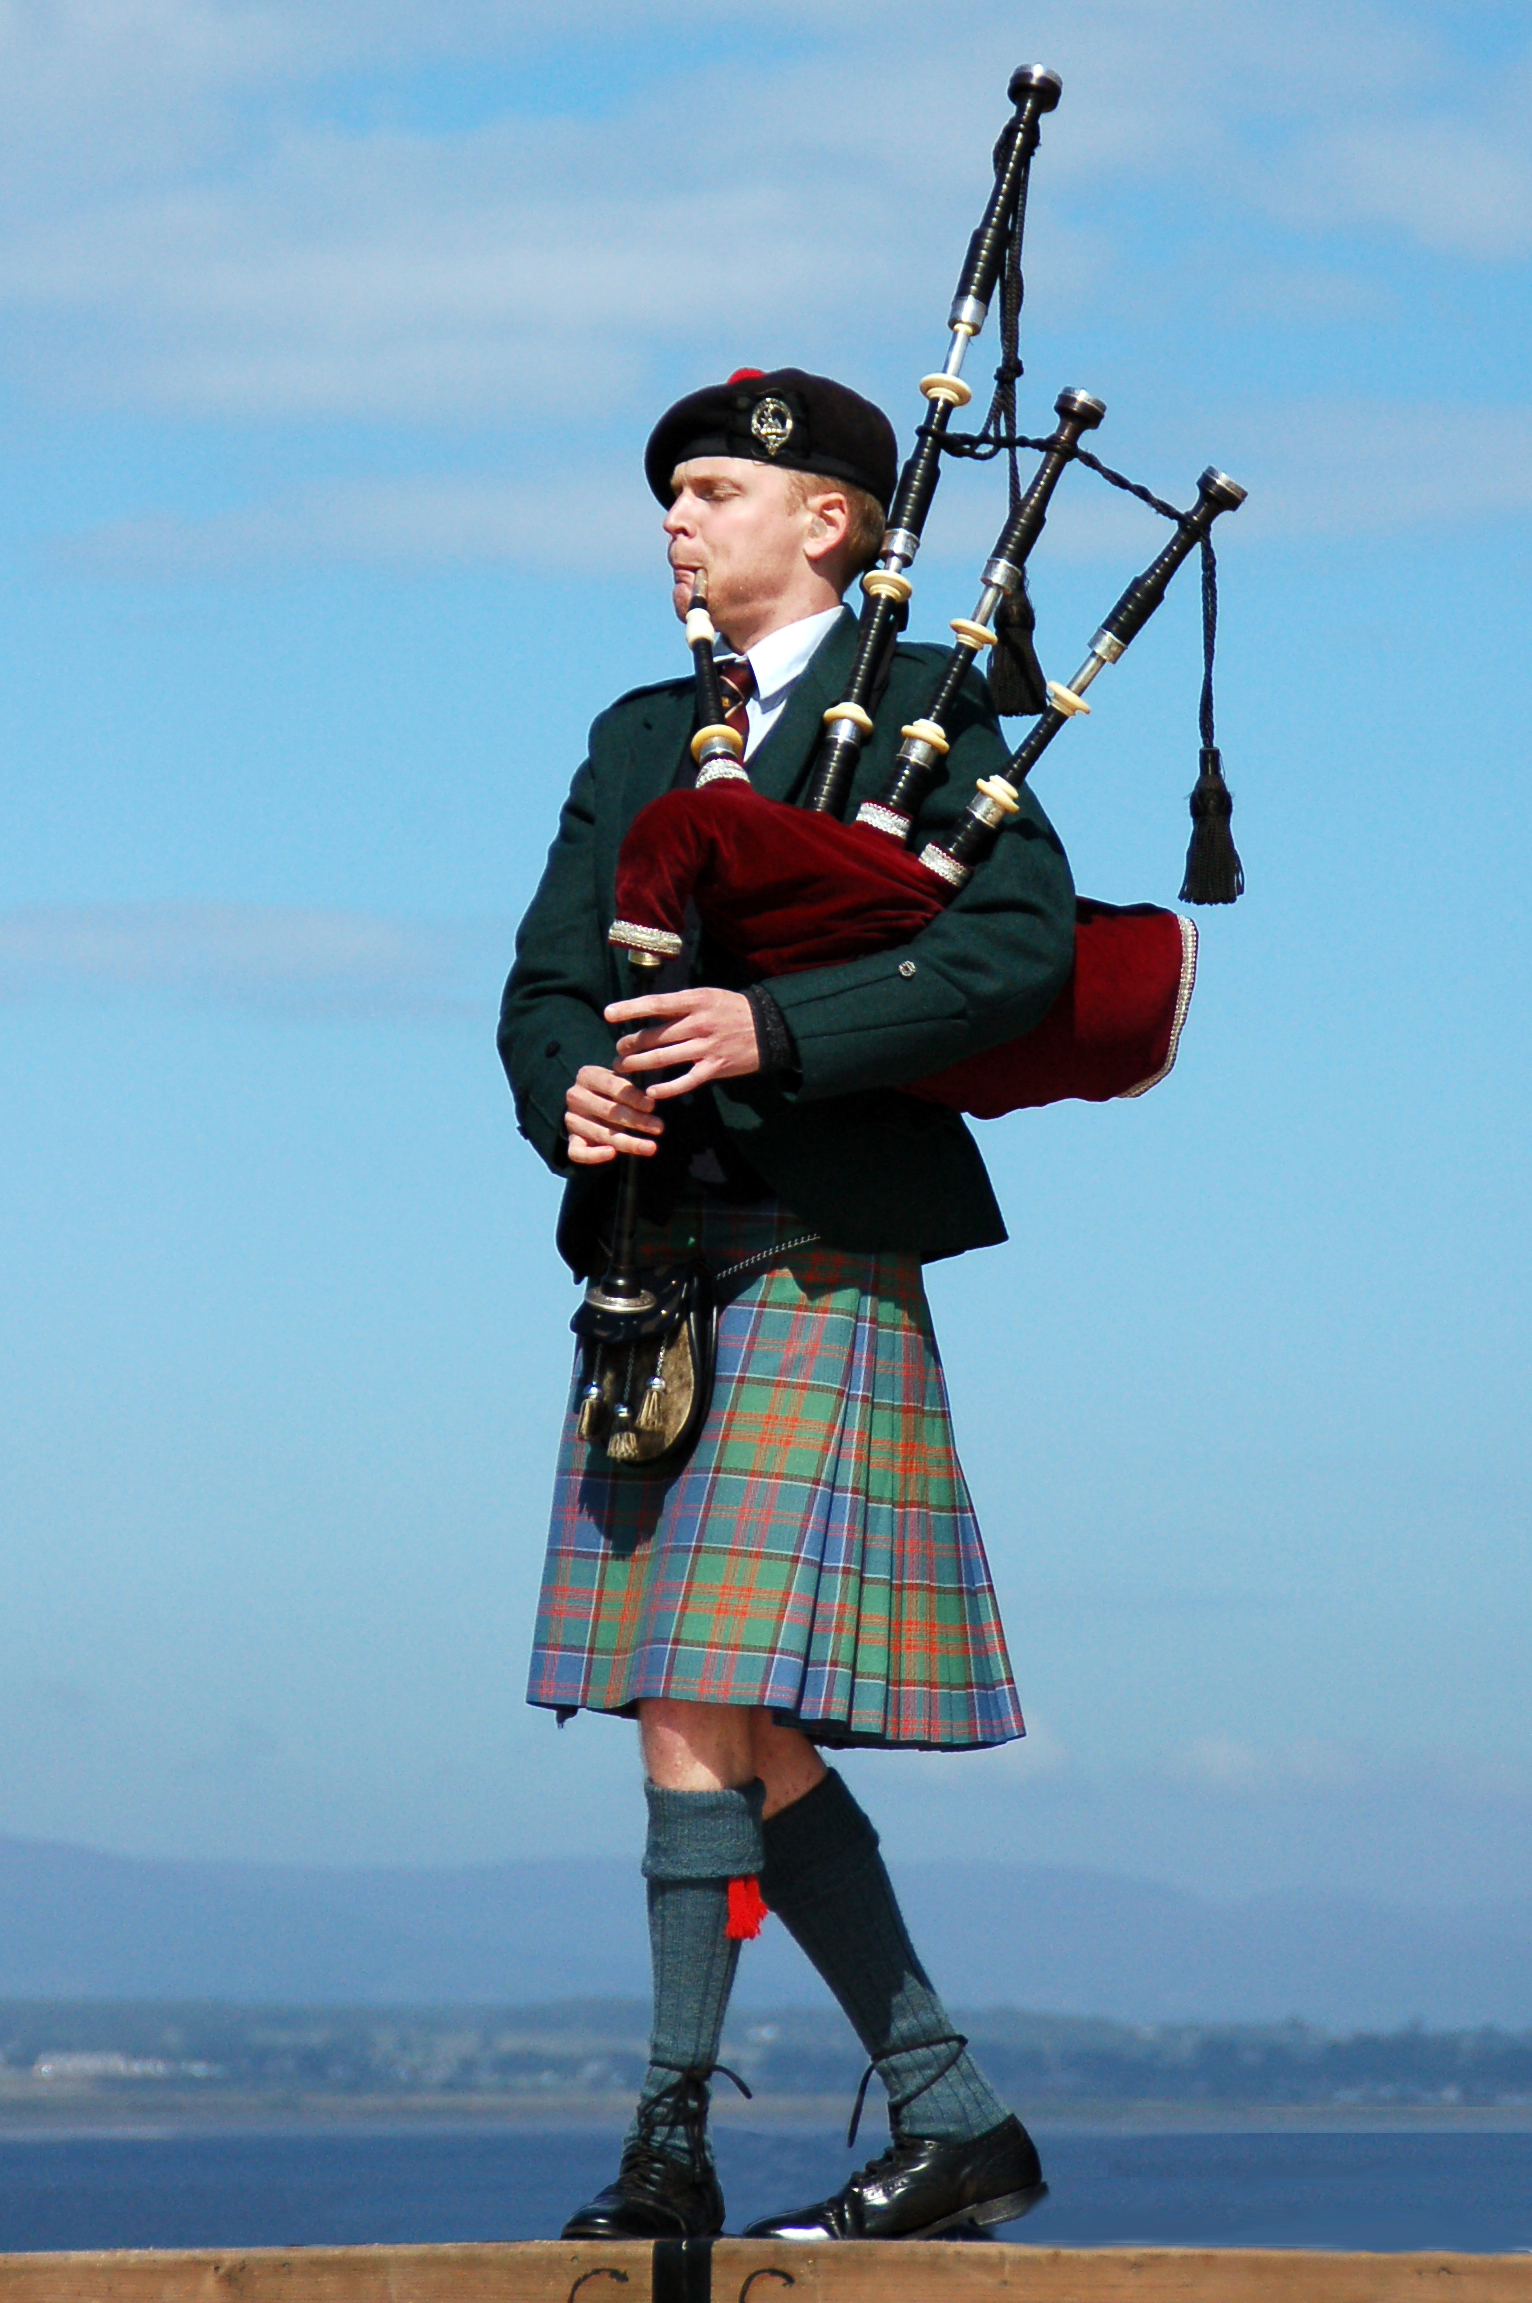 The bagpiper by Liz24601 on DeviantArt